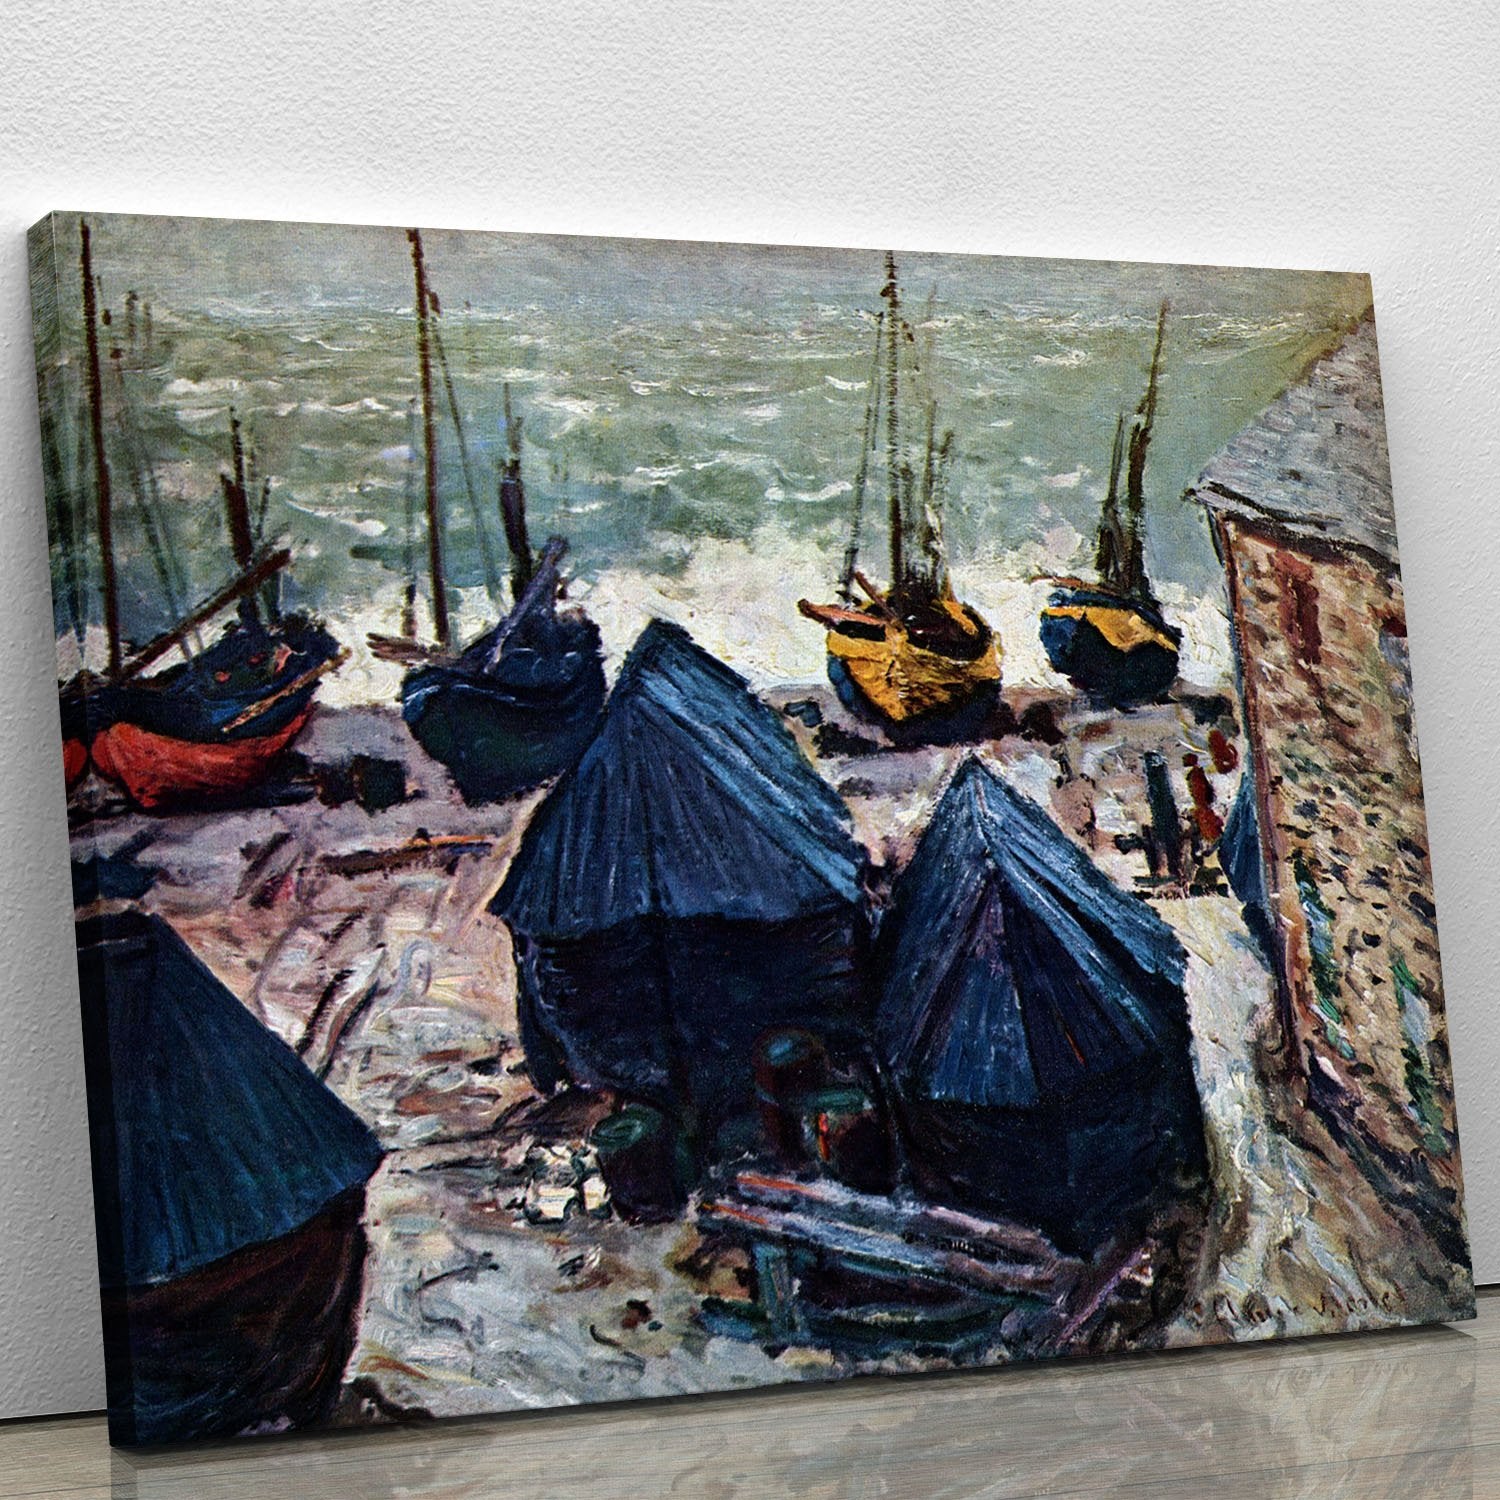 The Boats by Monet Canvas Print or Poster